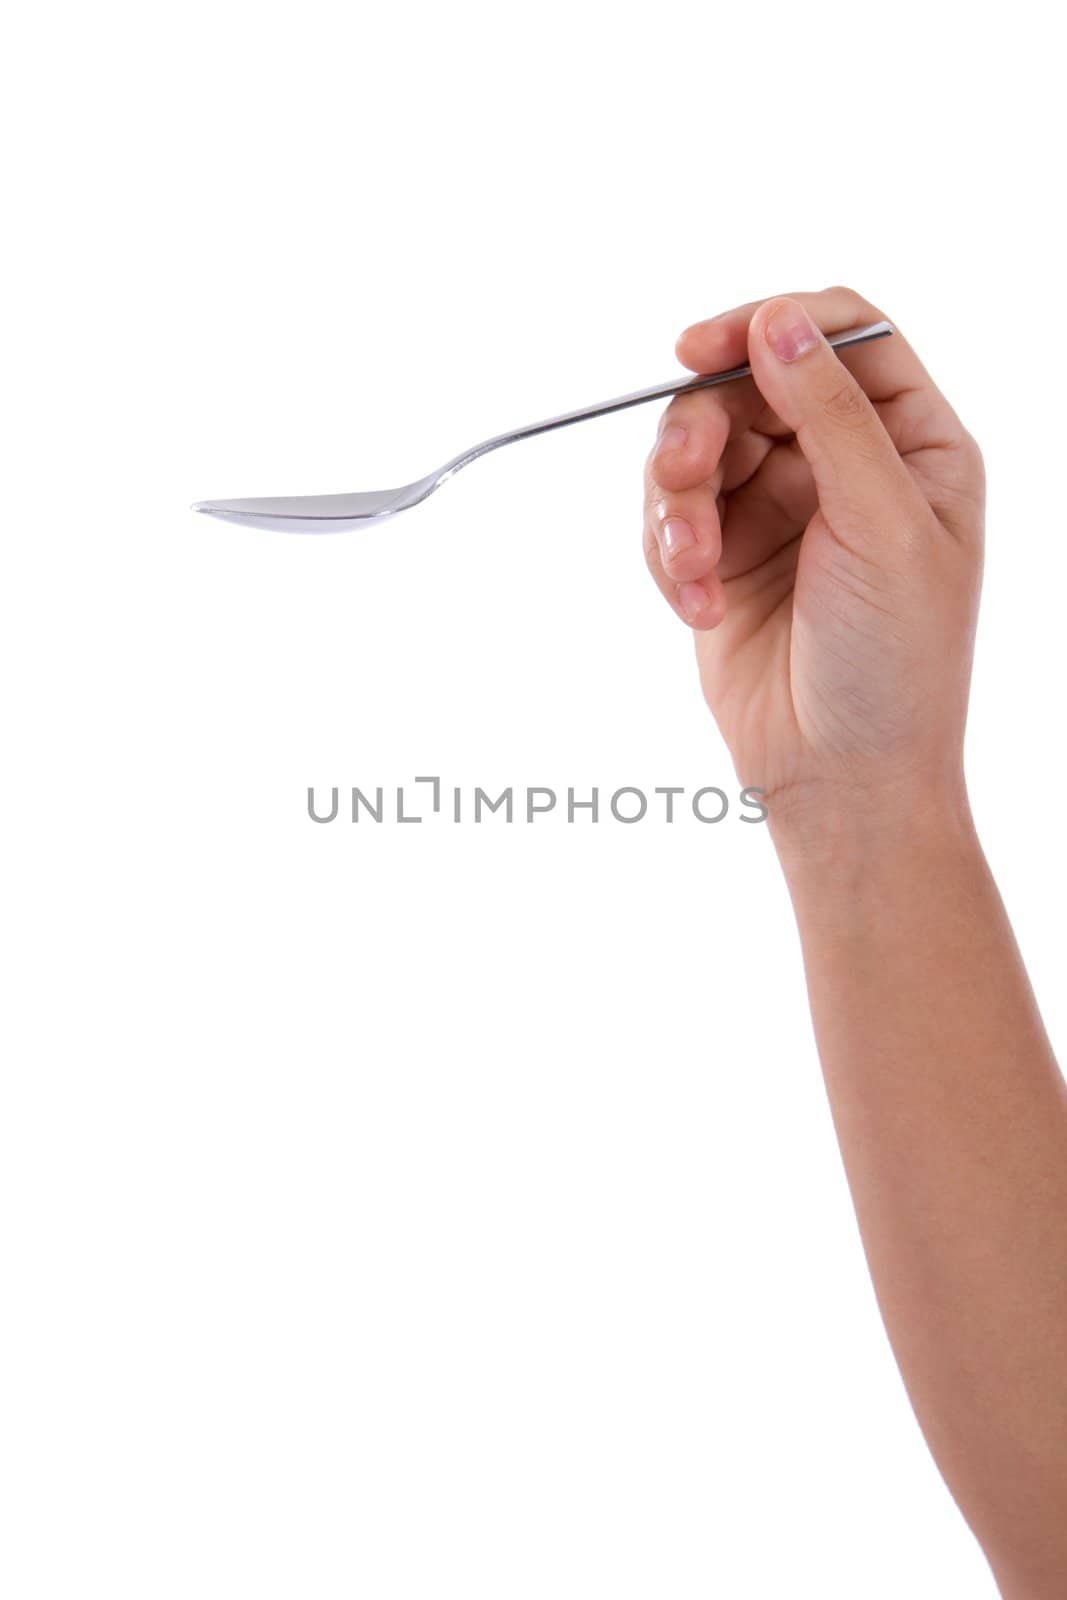 With forearm showing, hand holds empty spoon over white background.